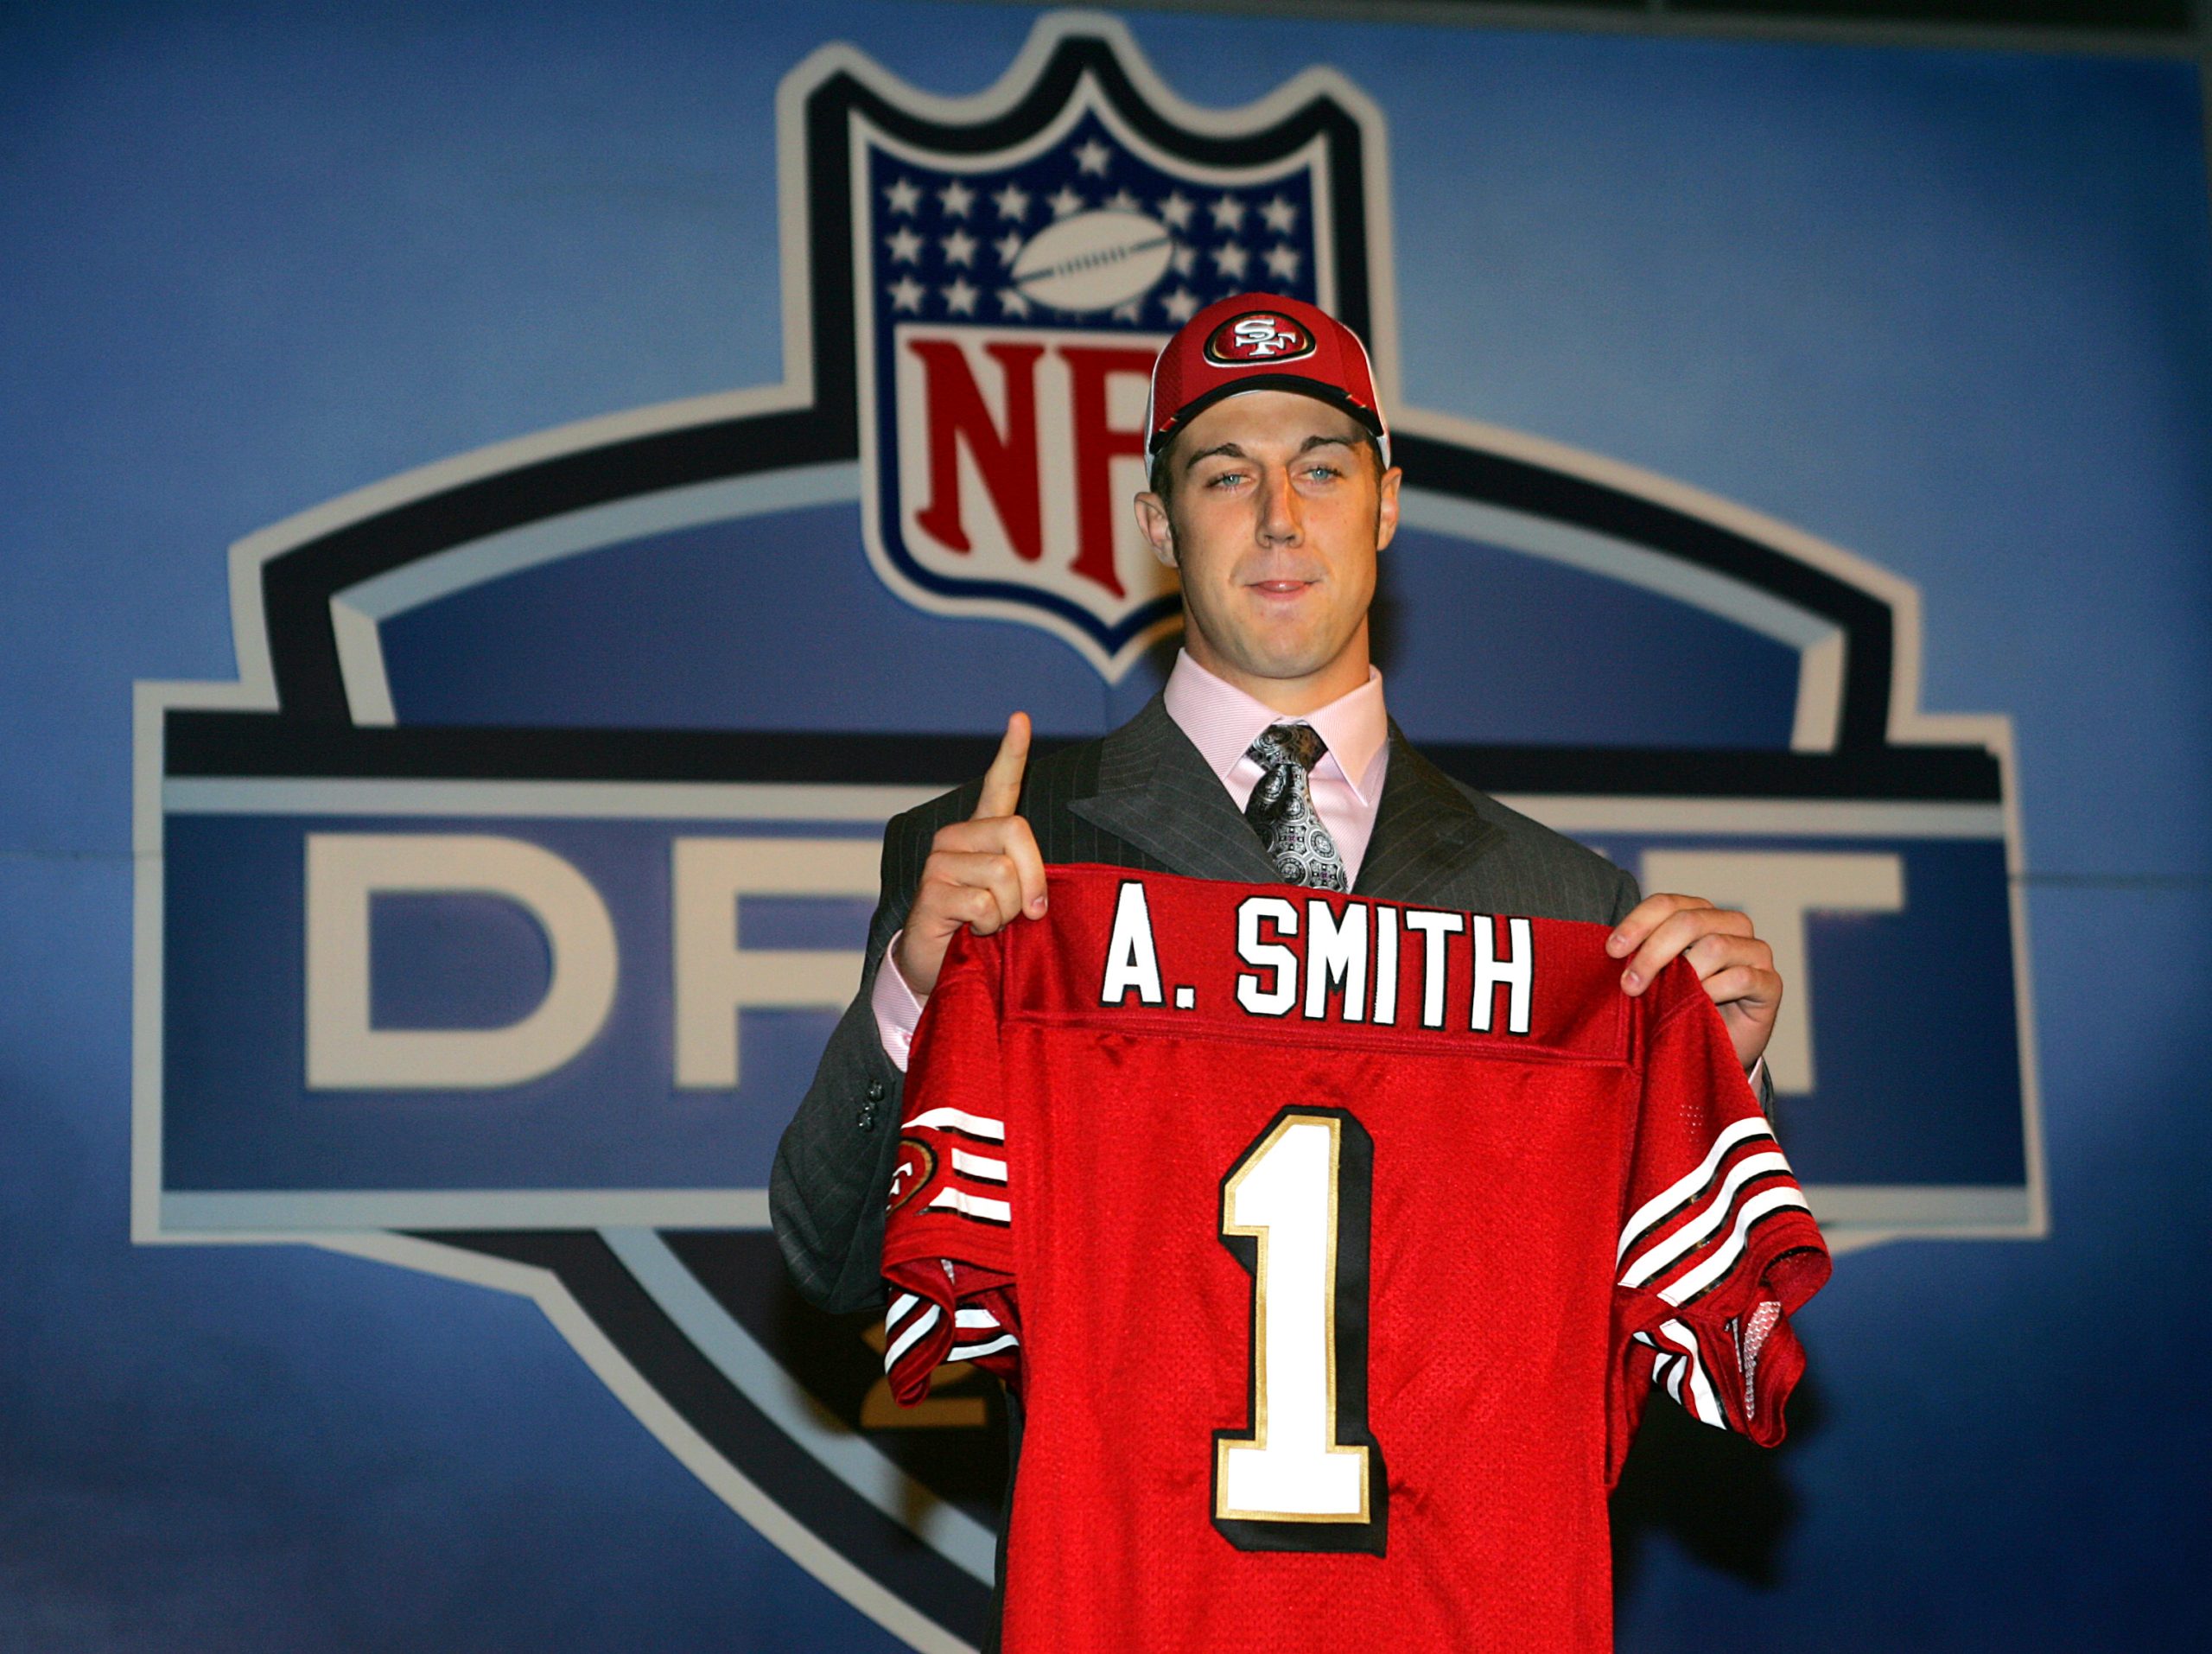 Alex Smith said a lot of pressure came with being the top pick.